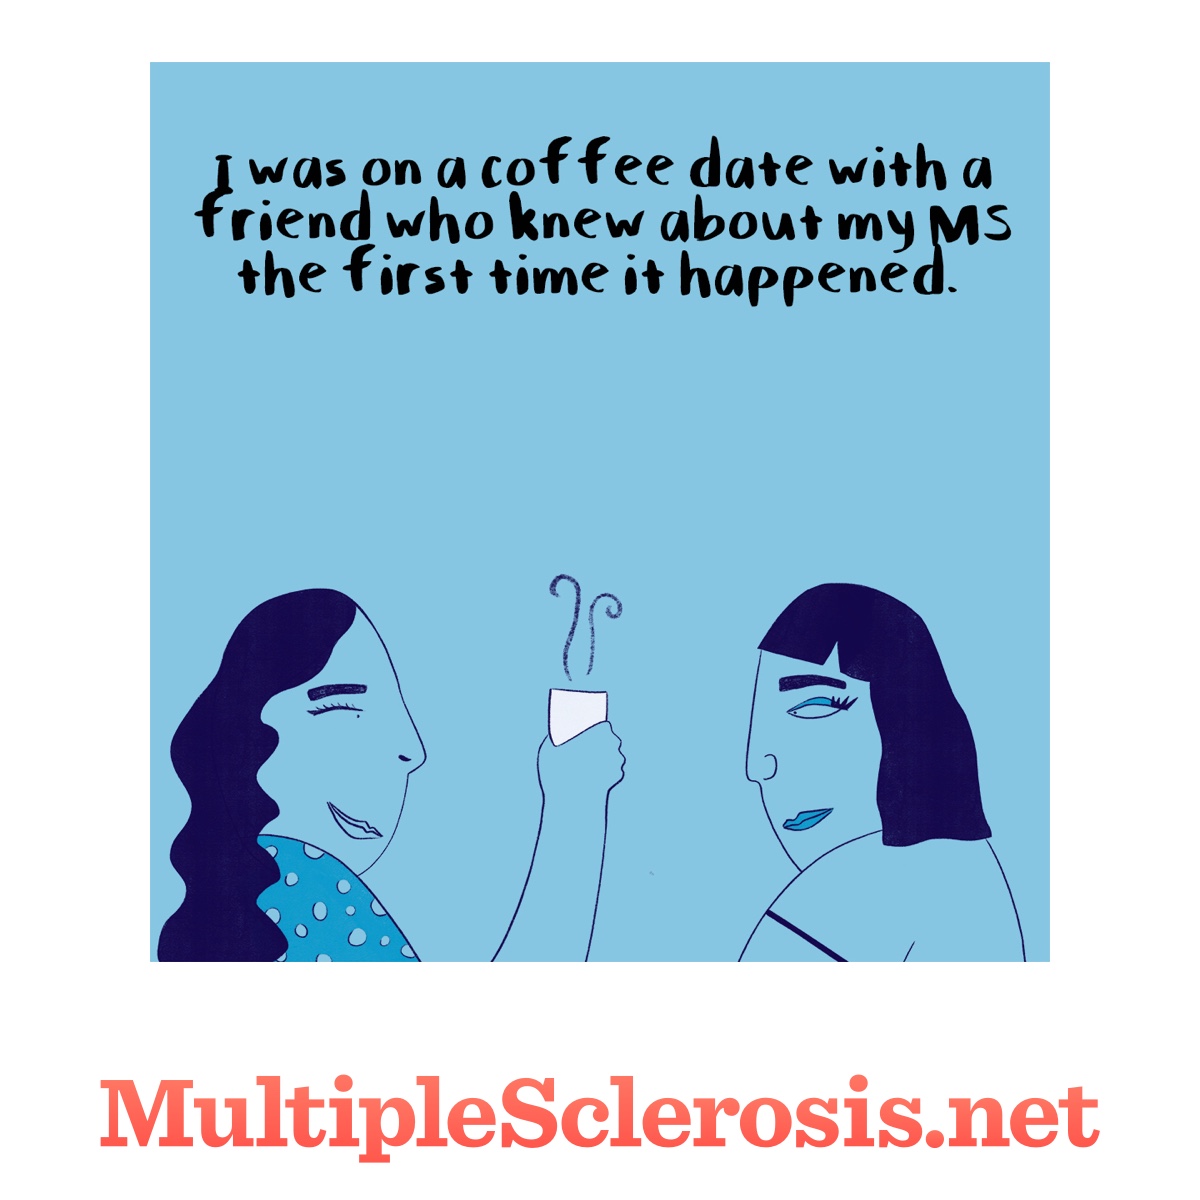 Two women drinking coffee text says I was on a coffee date with a friend who knew about my MS the first time it happened